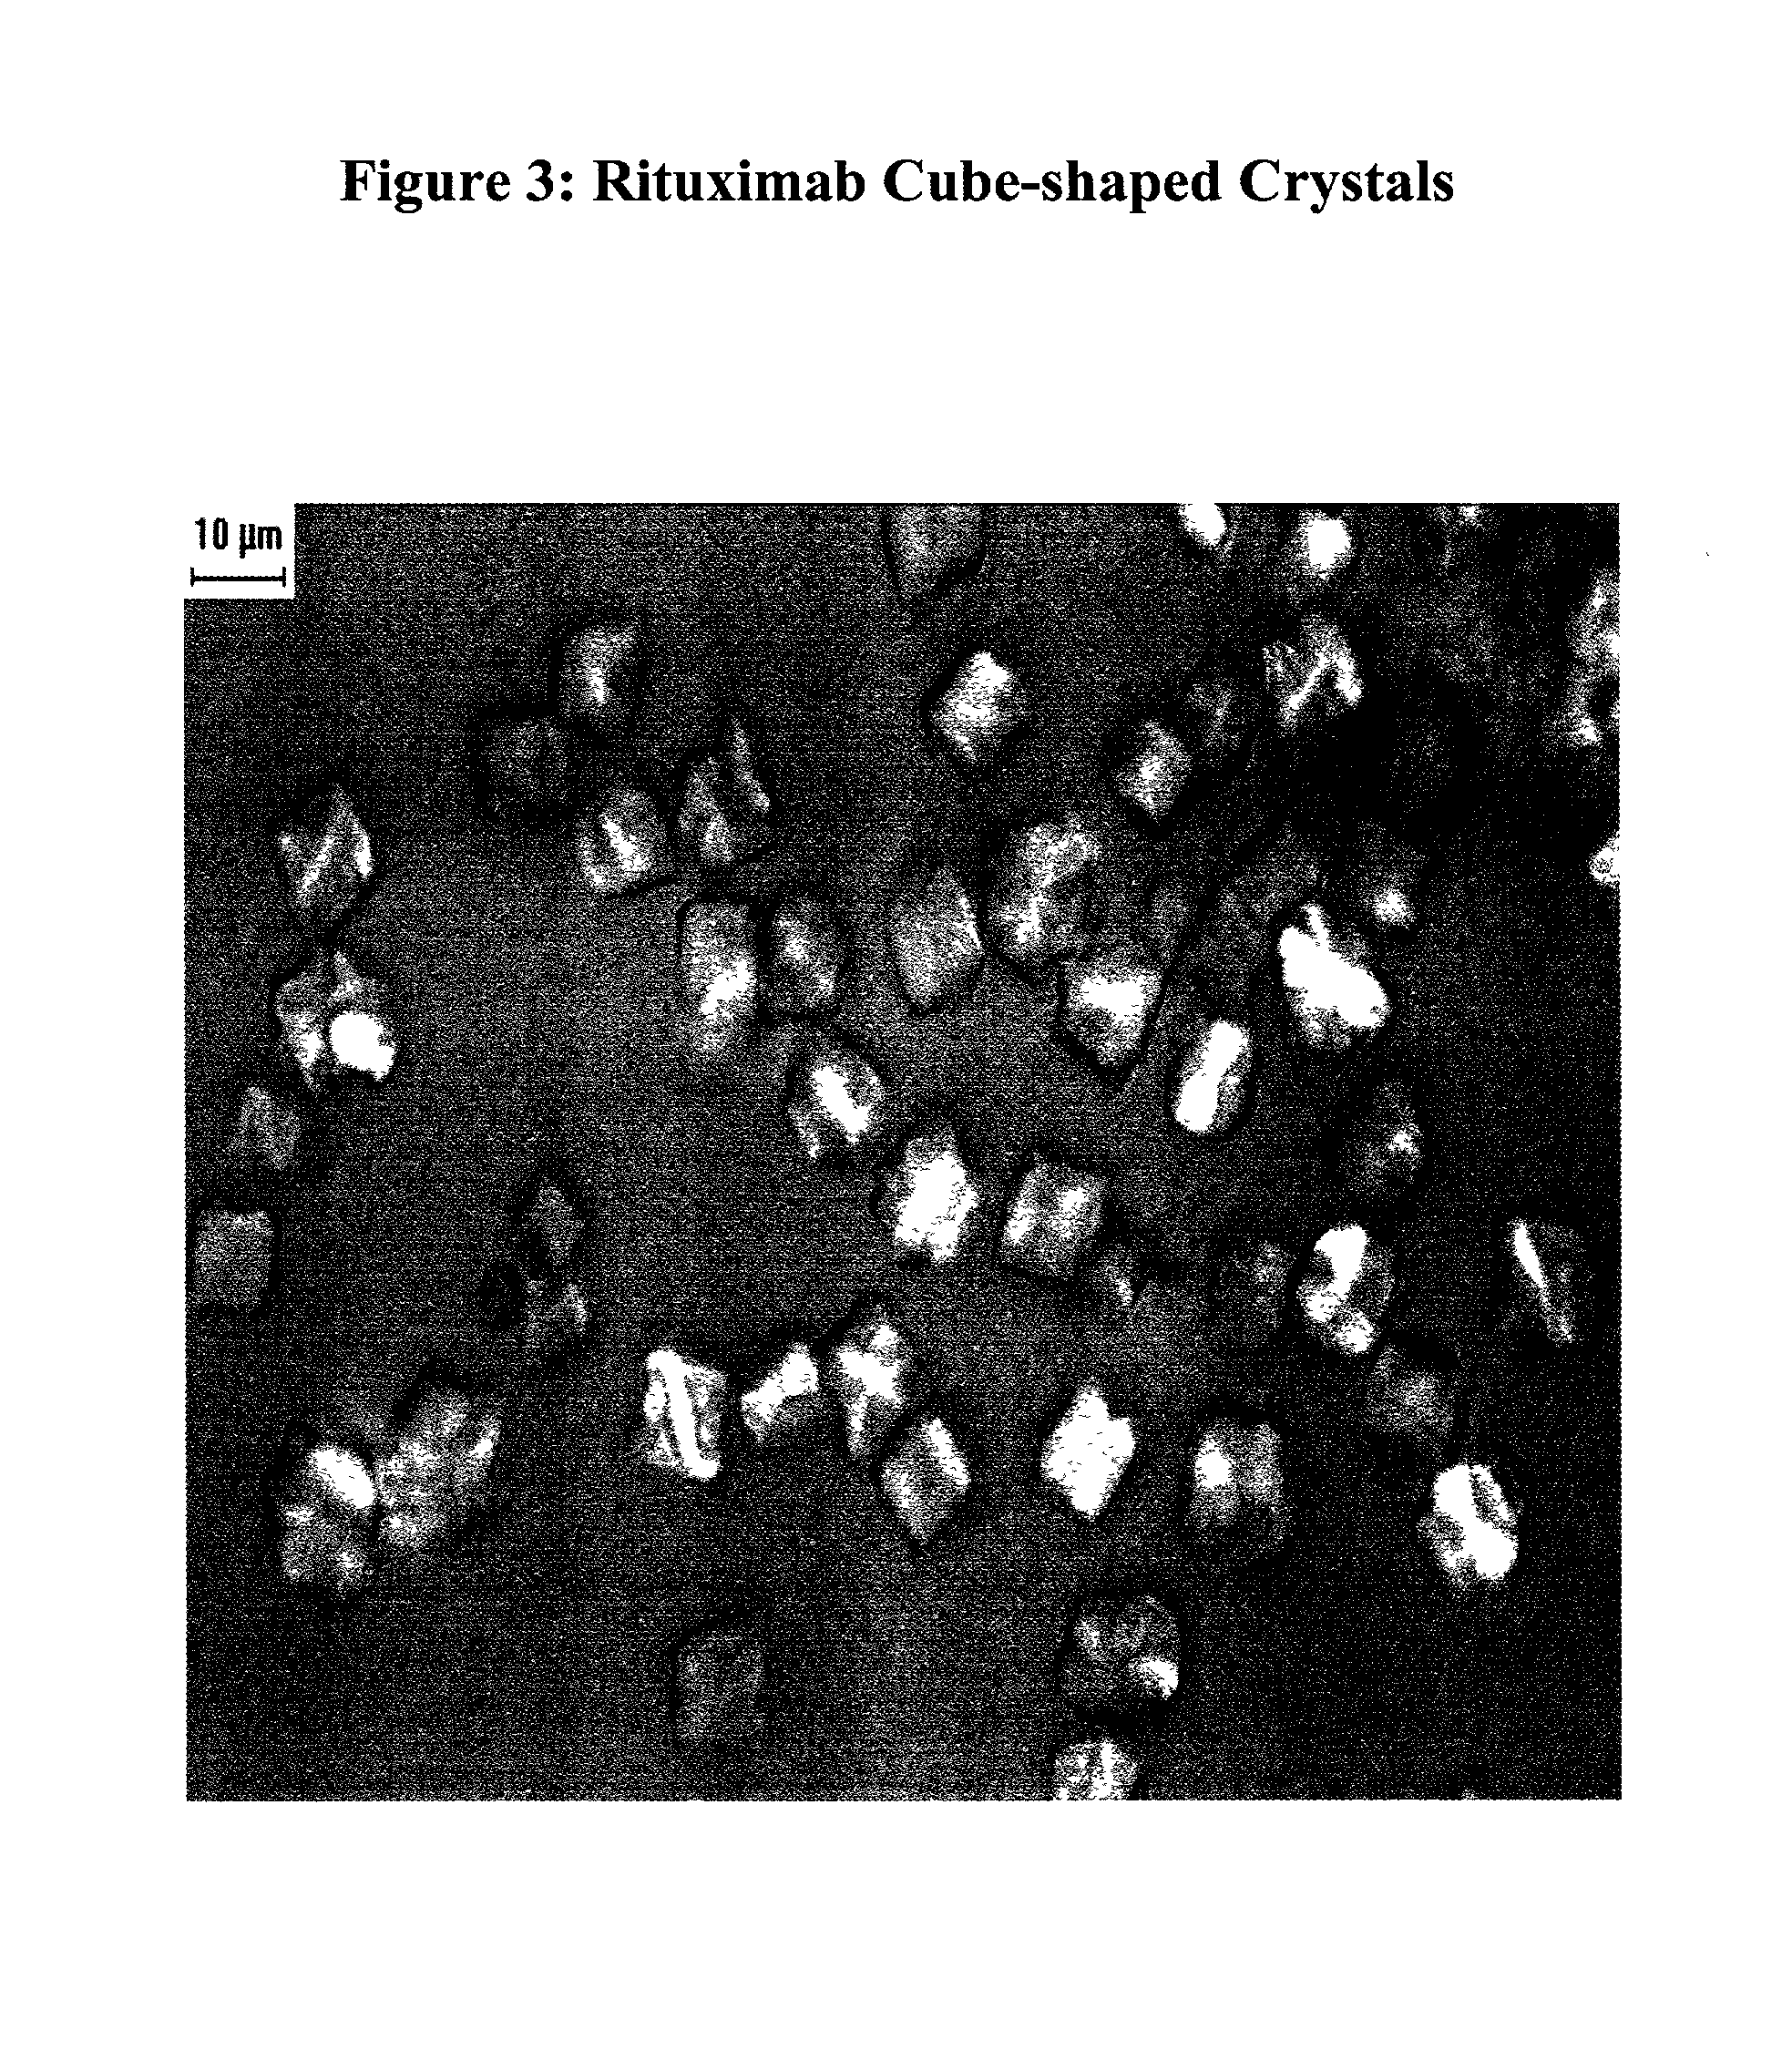 Crystals of whole antibodies and fragments thereof and methods for making and using them